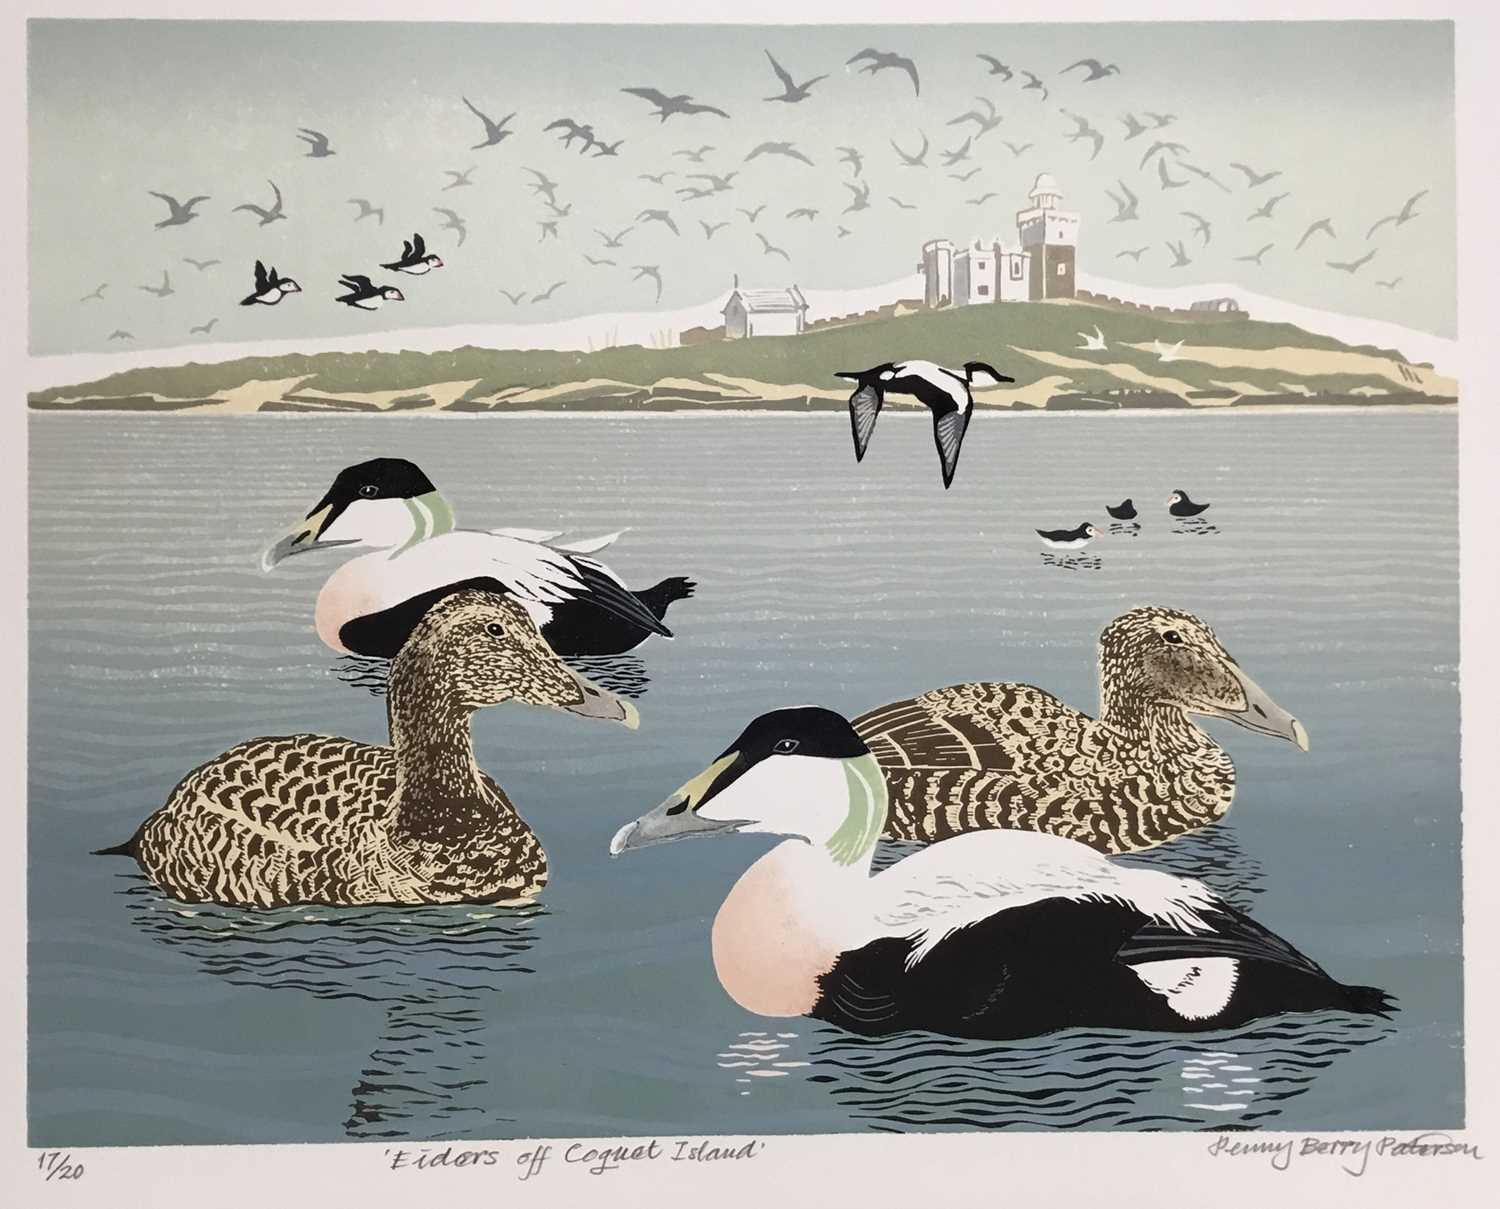 Lot 169 - Penny Berry Paterson (1941-2021) colour linocut print, Eiders off Coquat Island, signed and numbered 17/20, 32 x 41cm